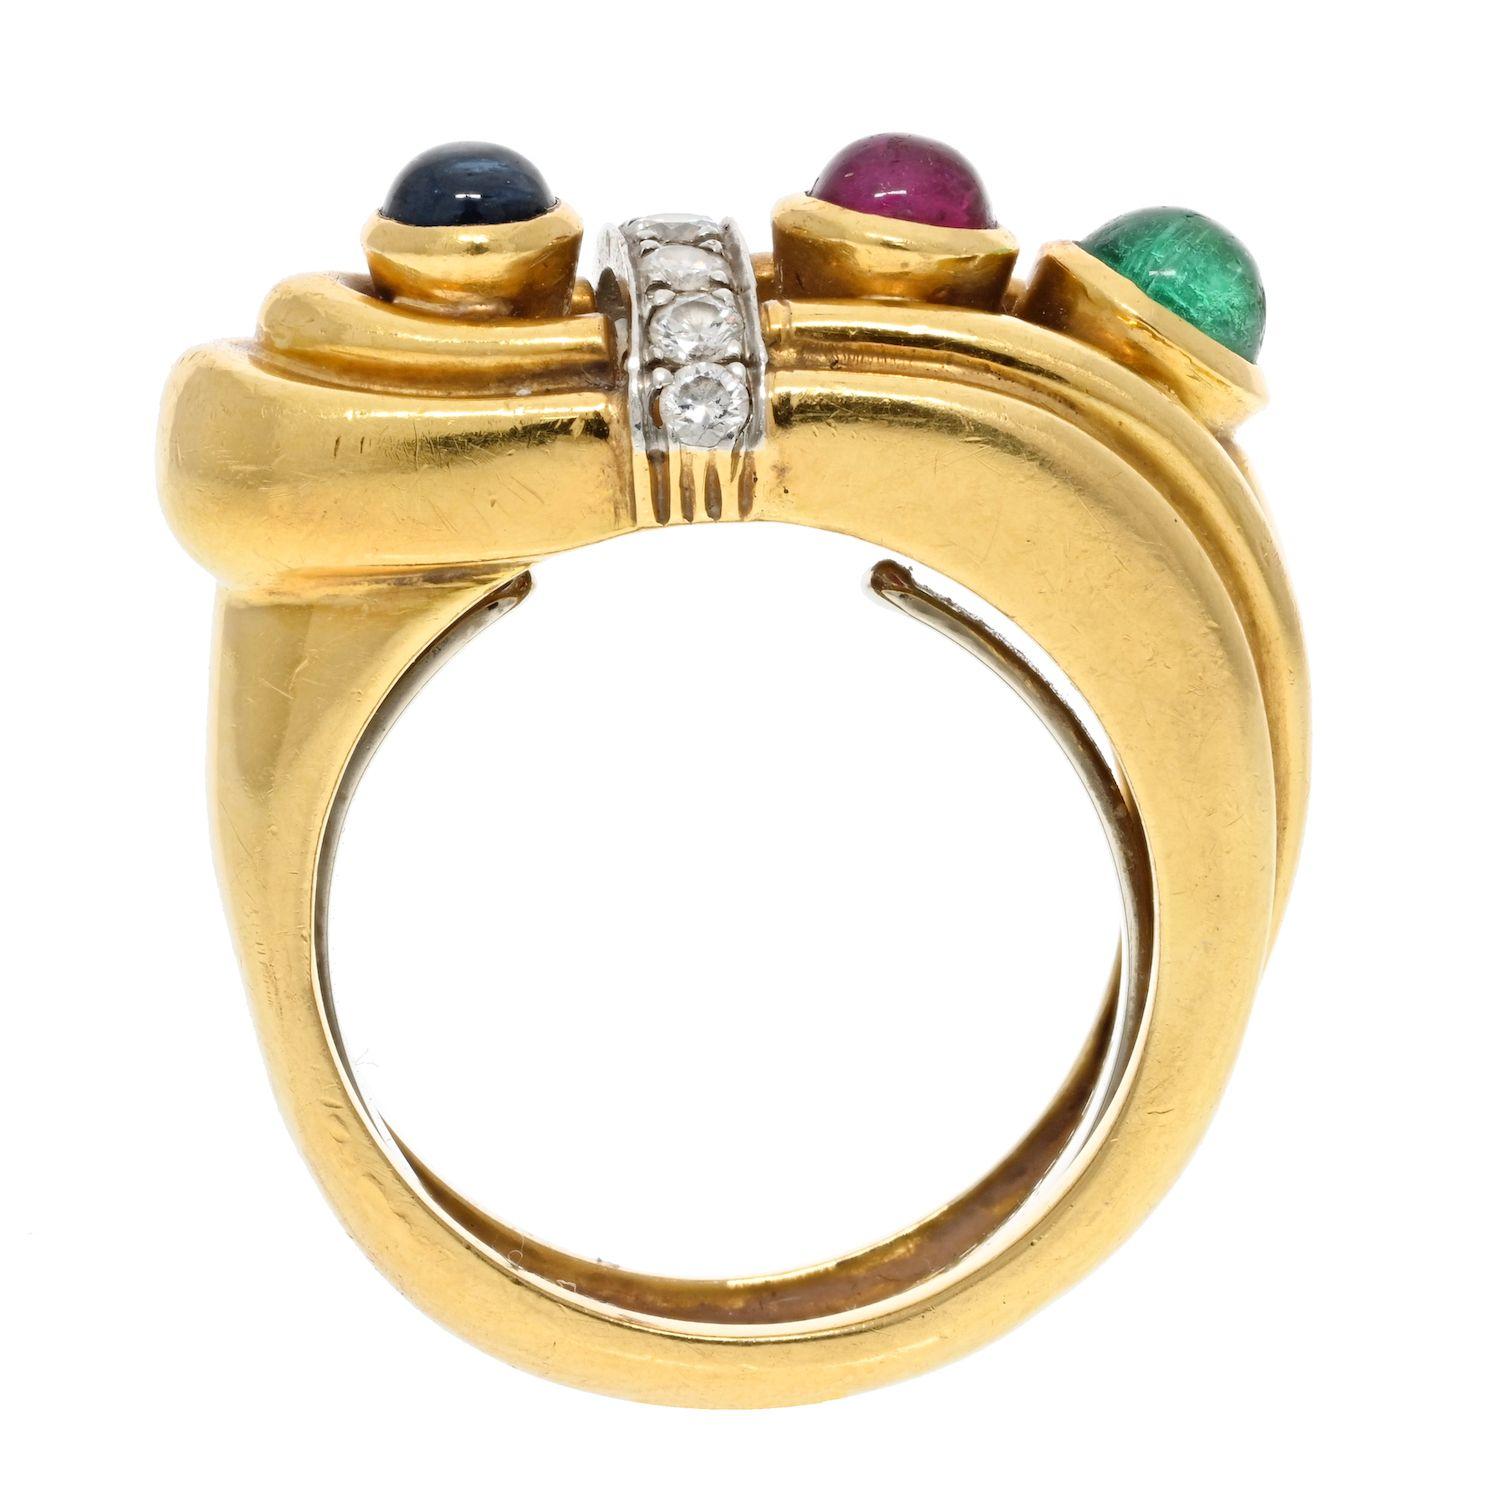 David Webb 18K Yellow Gold Diamond, Sapphire, Ruby And Emerald Buckle Ring.
18K yellow gold David Webb cocktail ring featuring bezel set ruby, sapphire and emerald with prong set round brilliant diamond accents throughout.
Measurements: Band Width